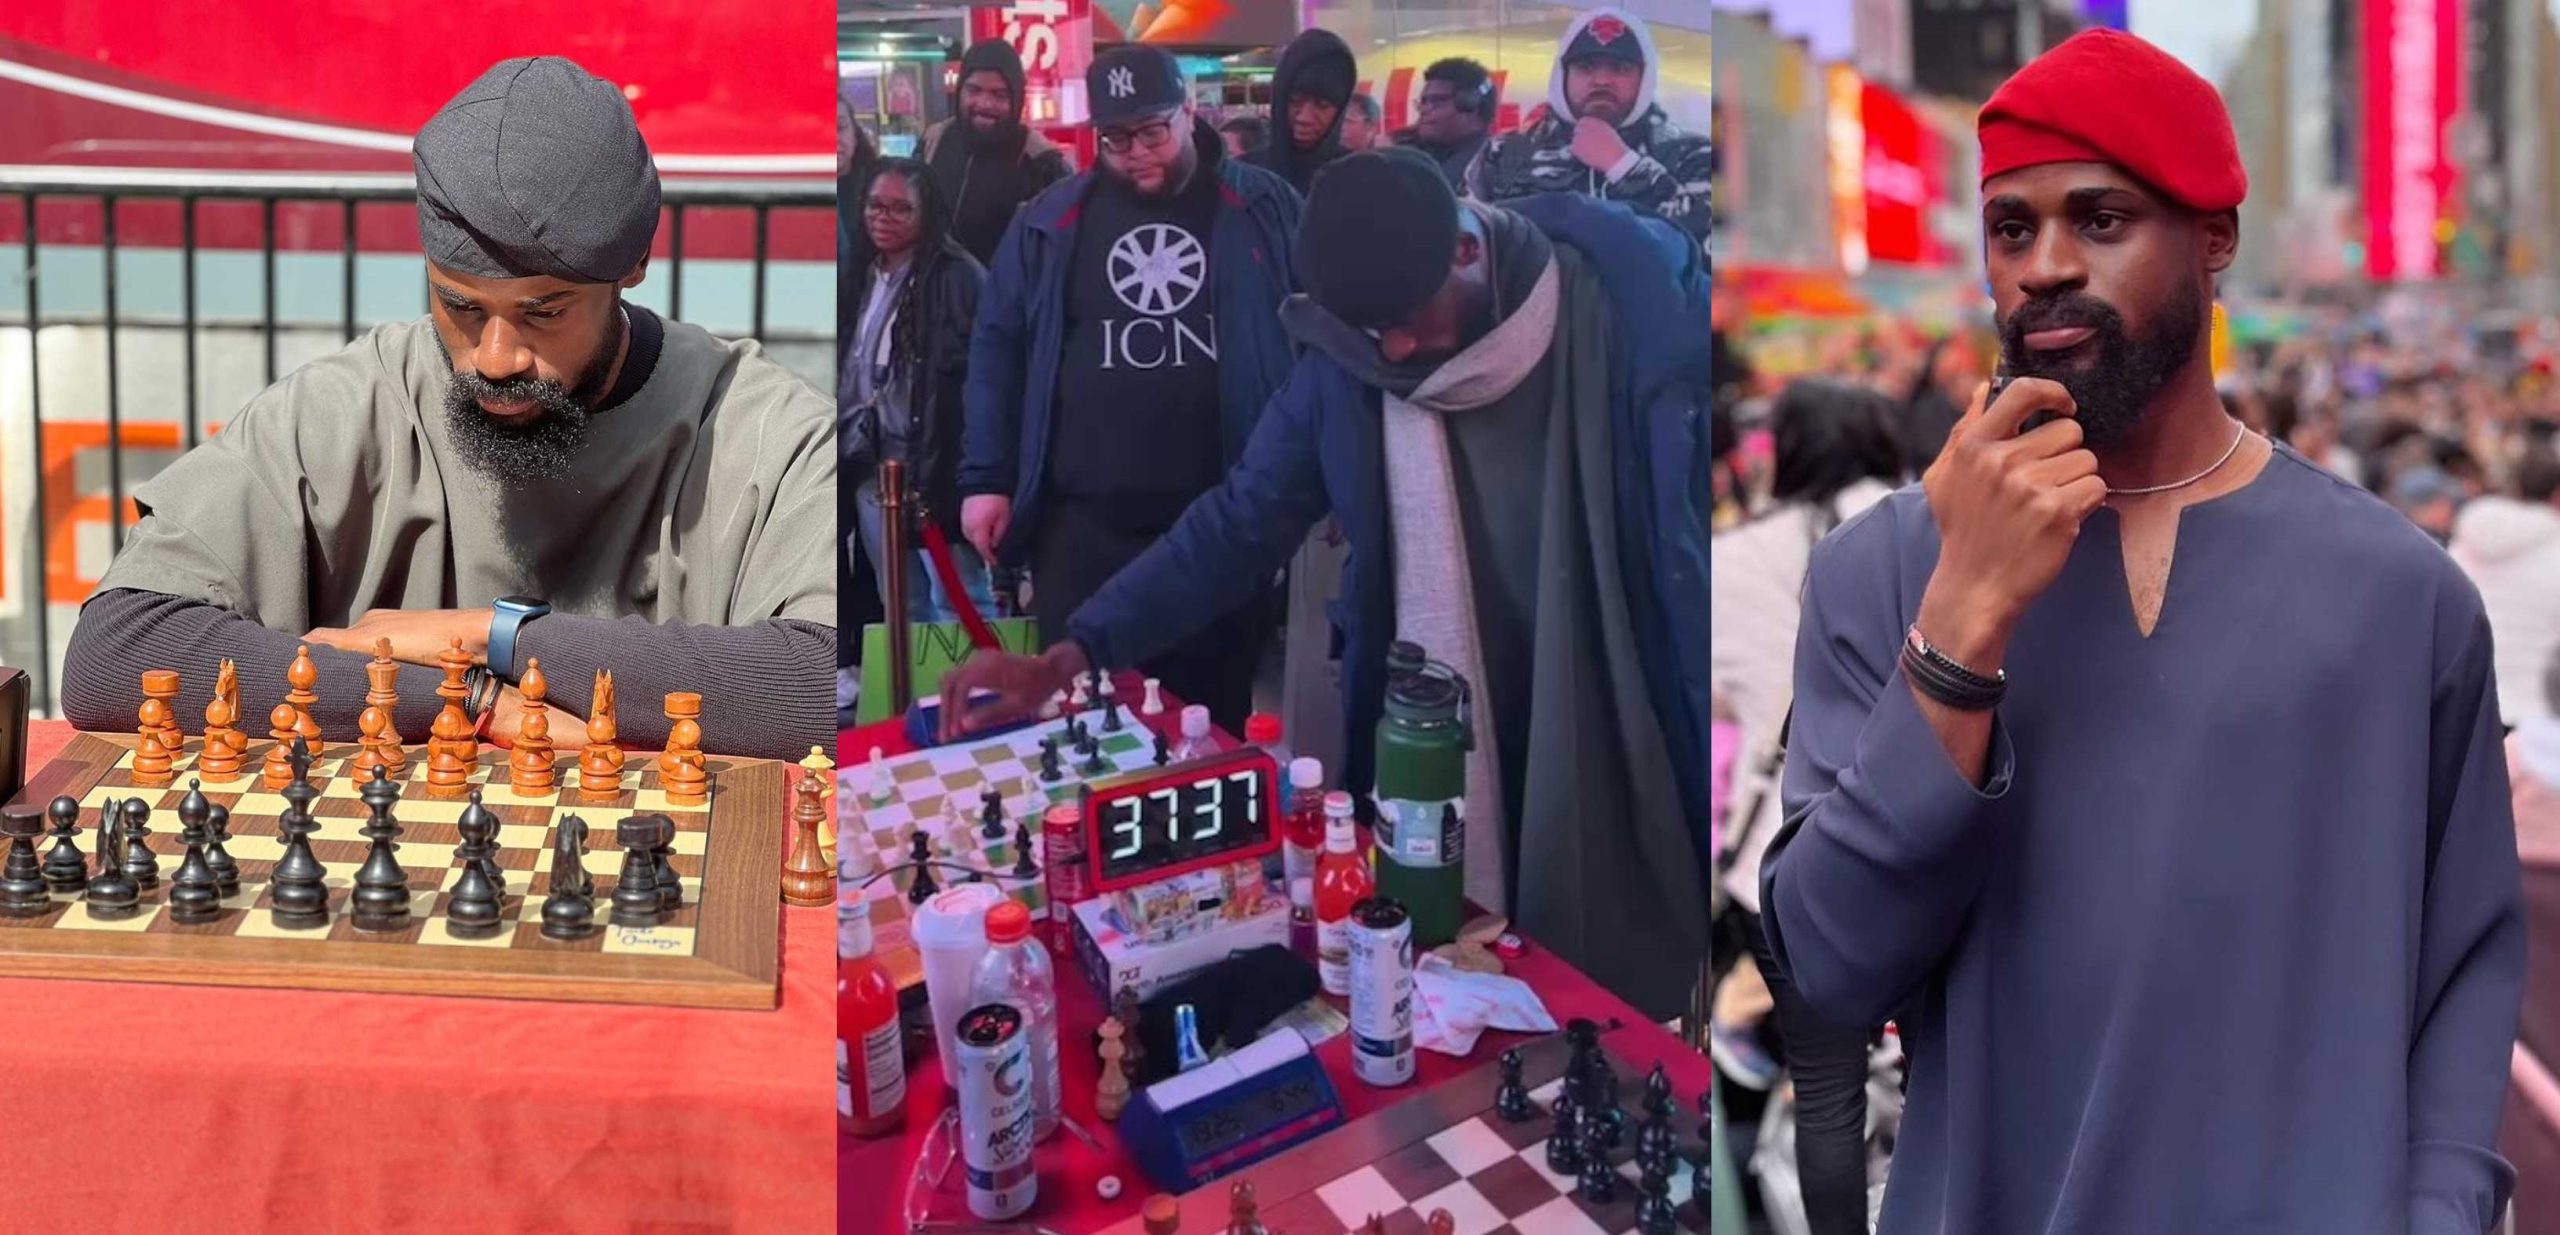 Tunde Onakoya surpasses 48 hours into chess marathon in New York as he set to breaks Guinness World Record, over $50k donated